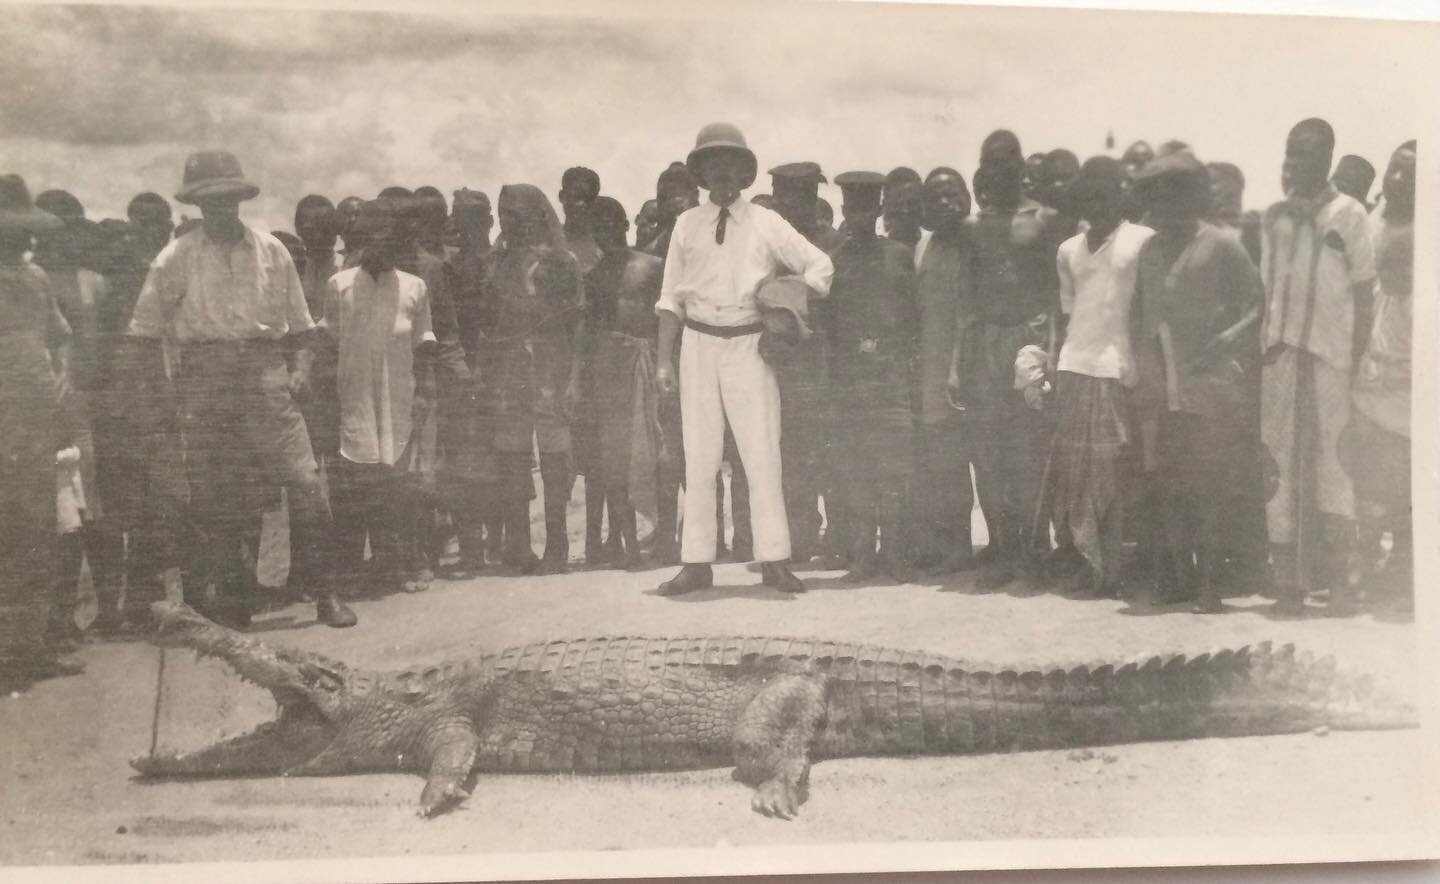 This is my great grandad. He put on his pith helmet and fought this crocodile to make the world safer for all Englishmen.